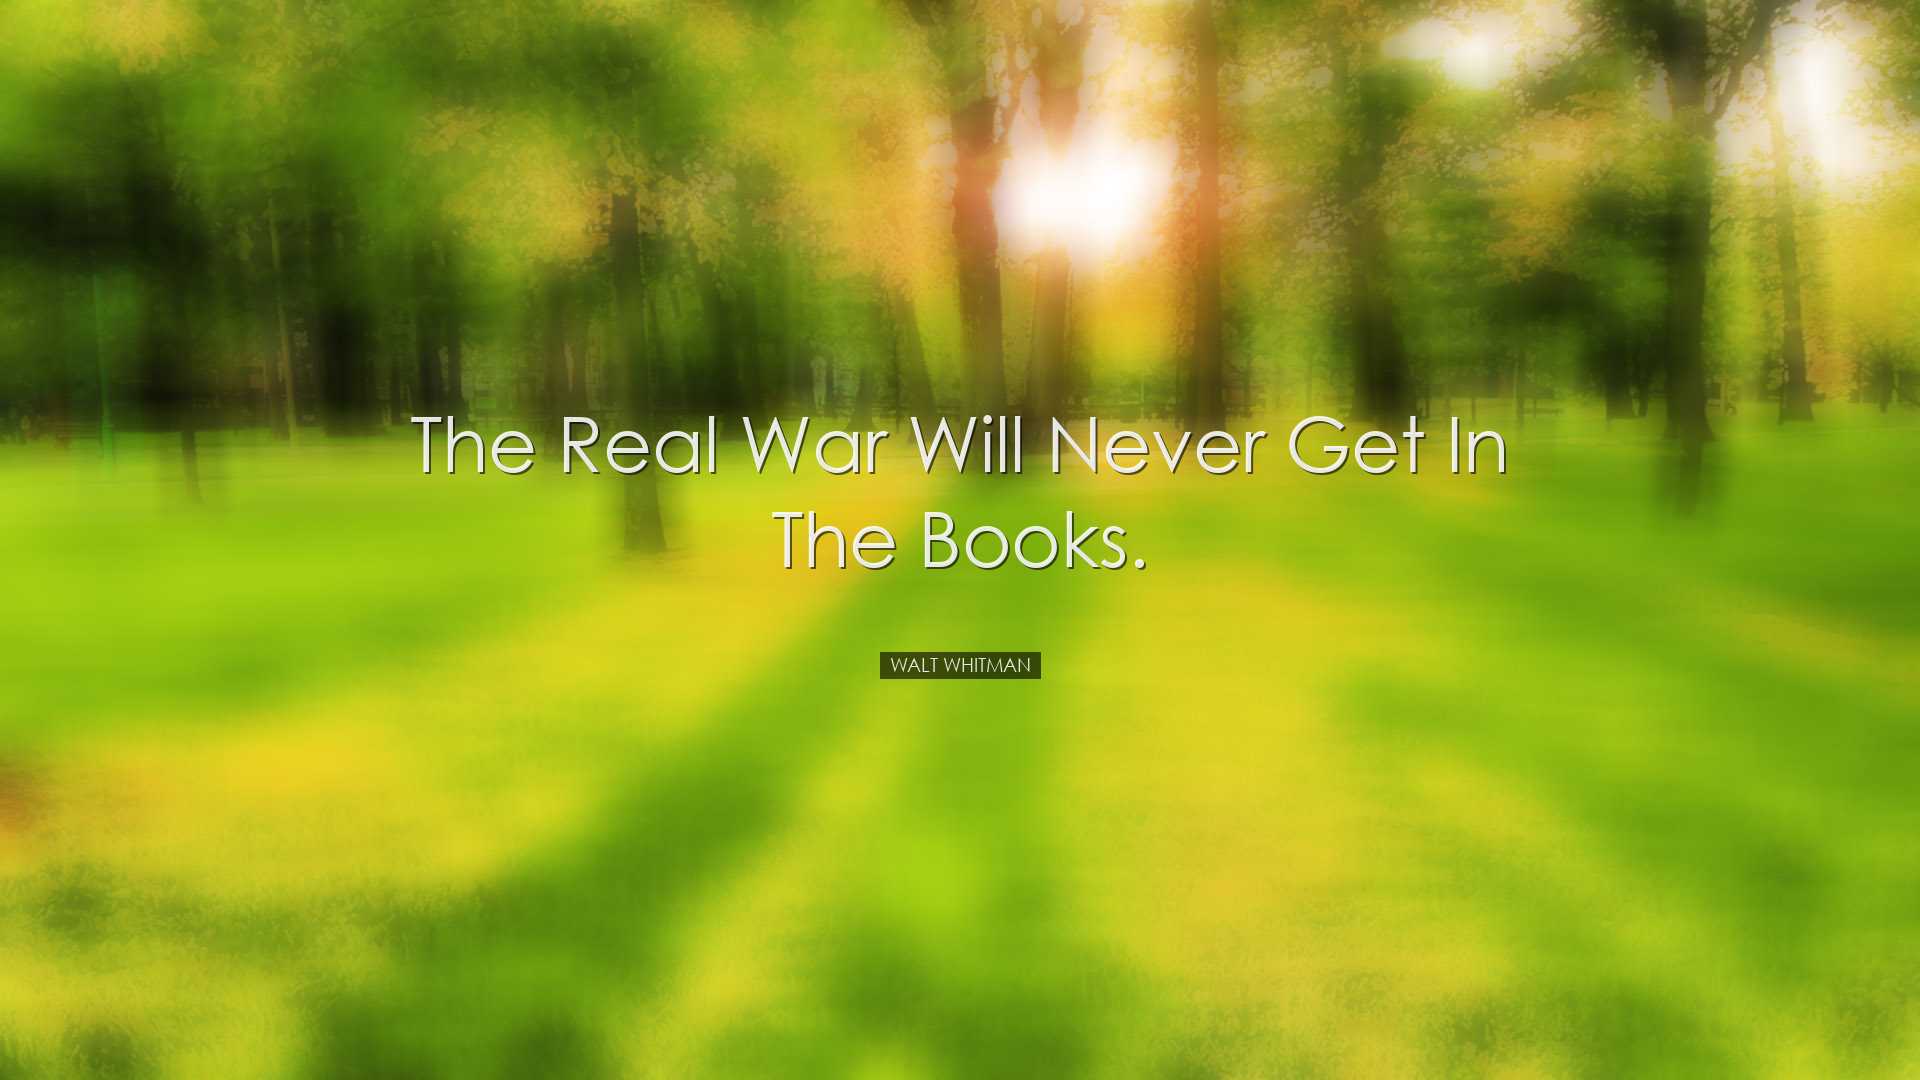 The real war will never get in the books. - Walt Whitman